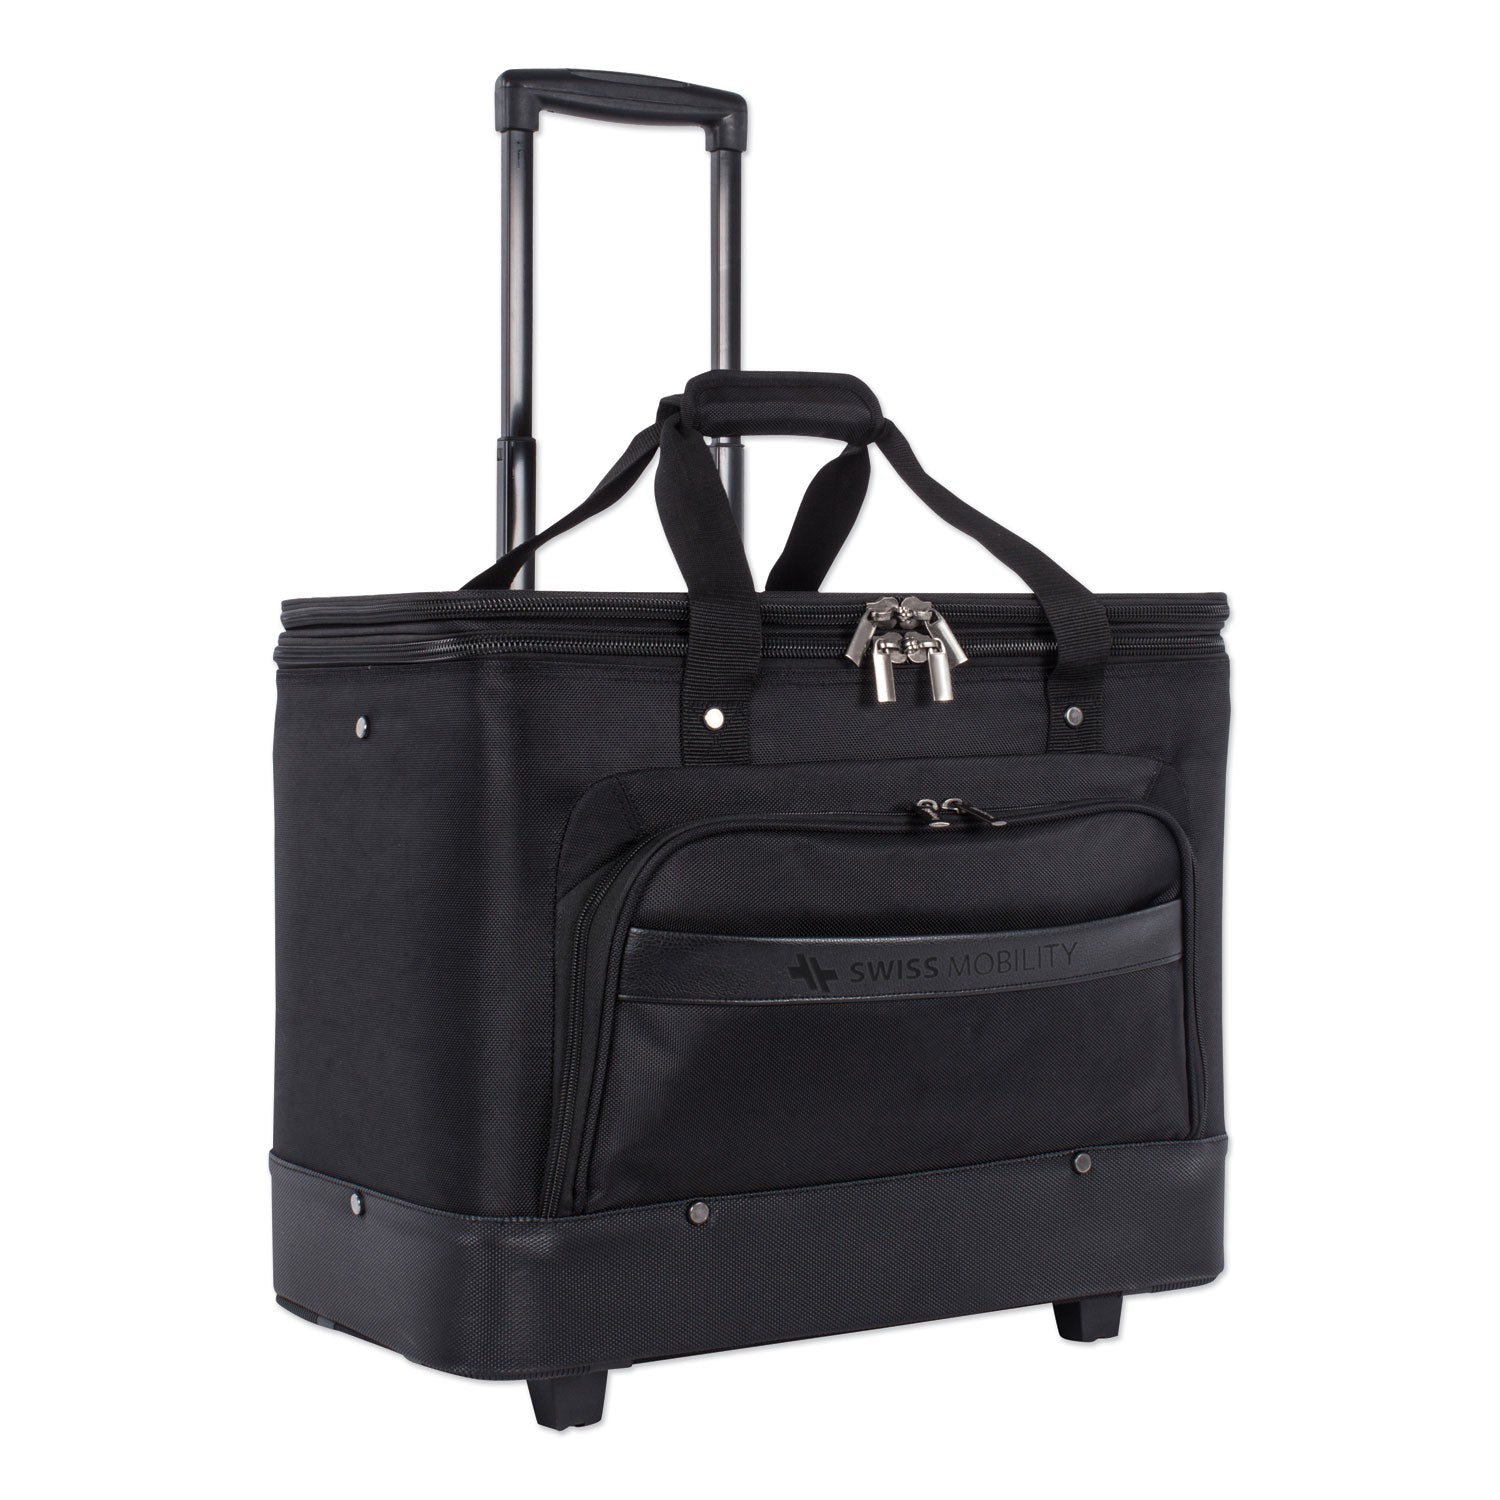 litigation-business-case-on-wheels-fits-devices-up-to-173-polyester-11-x-19-x-16-black_swzbzcw1645smbk - 1